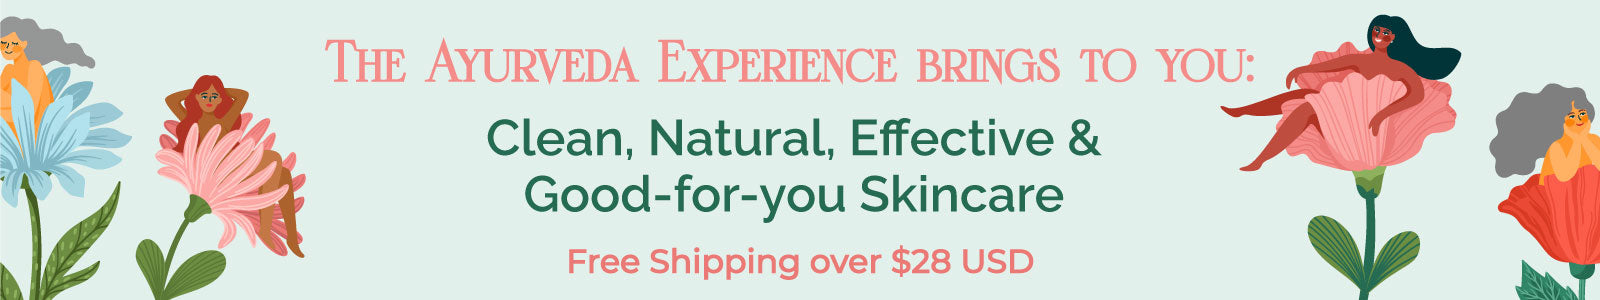 Image reads THE AYURVEDA EXPERIENCE BRINGS TO YOU: Clean, Natural, Effective & Good-for-you Skincare Free Shipping over $28 USD.